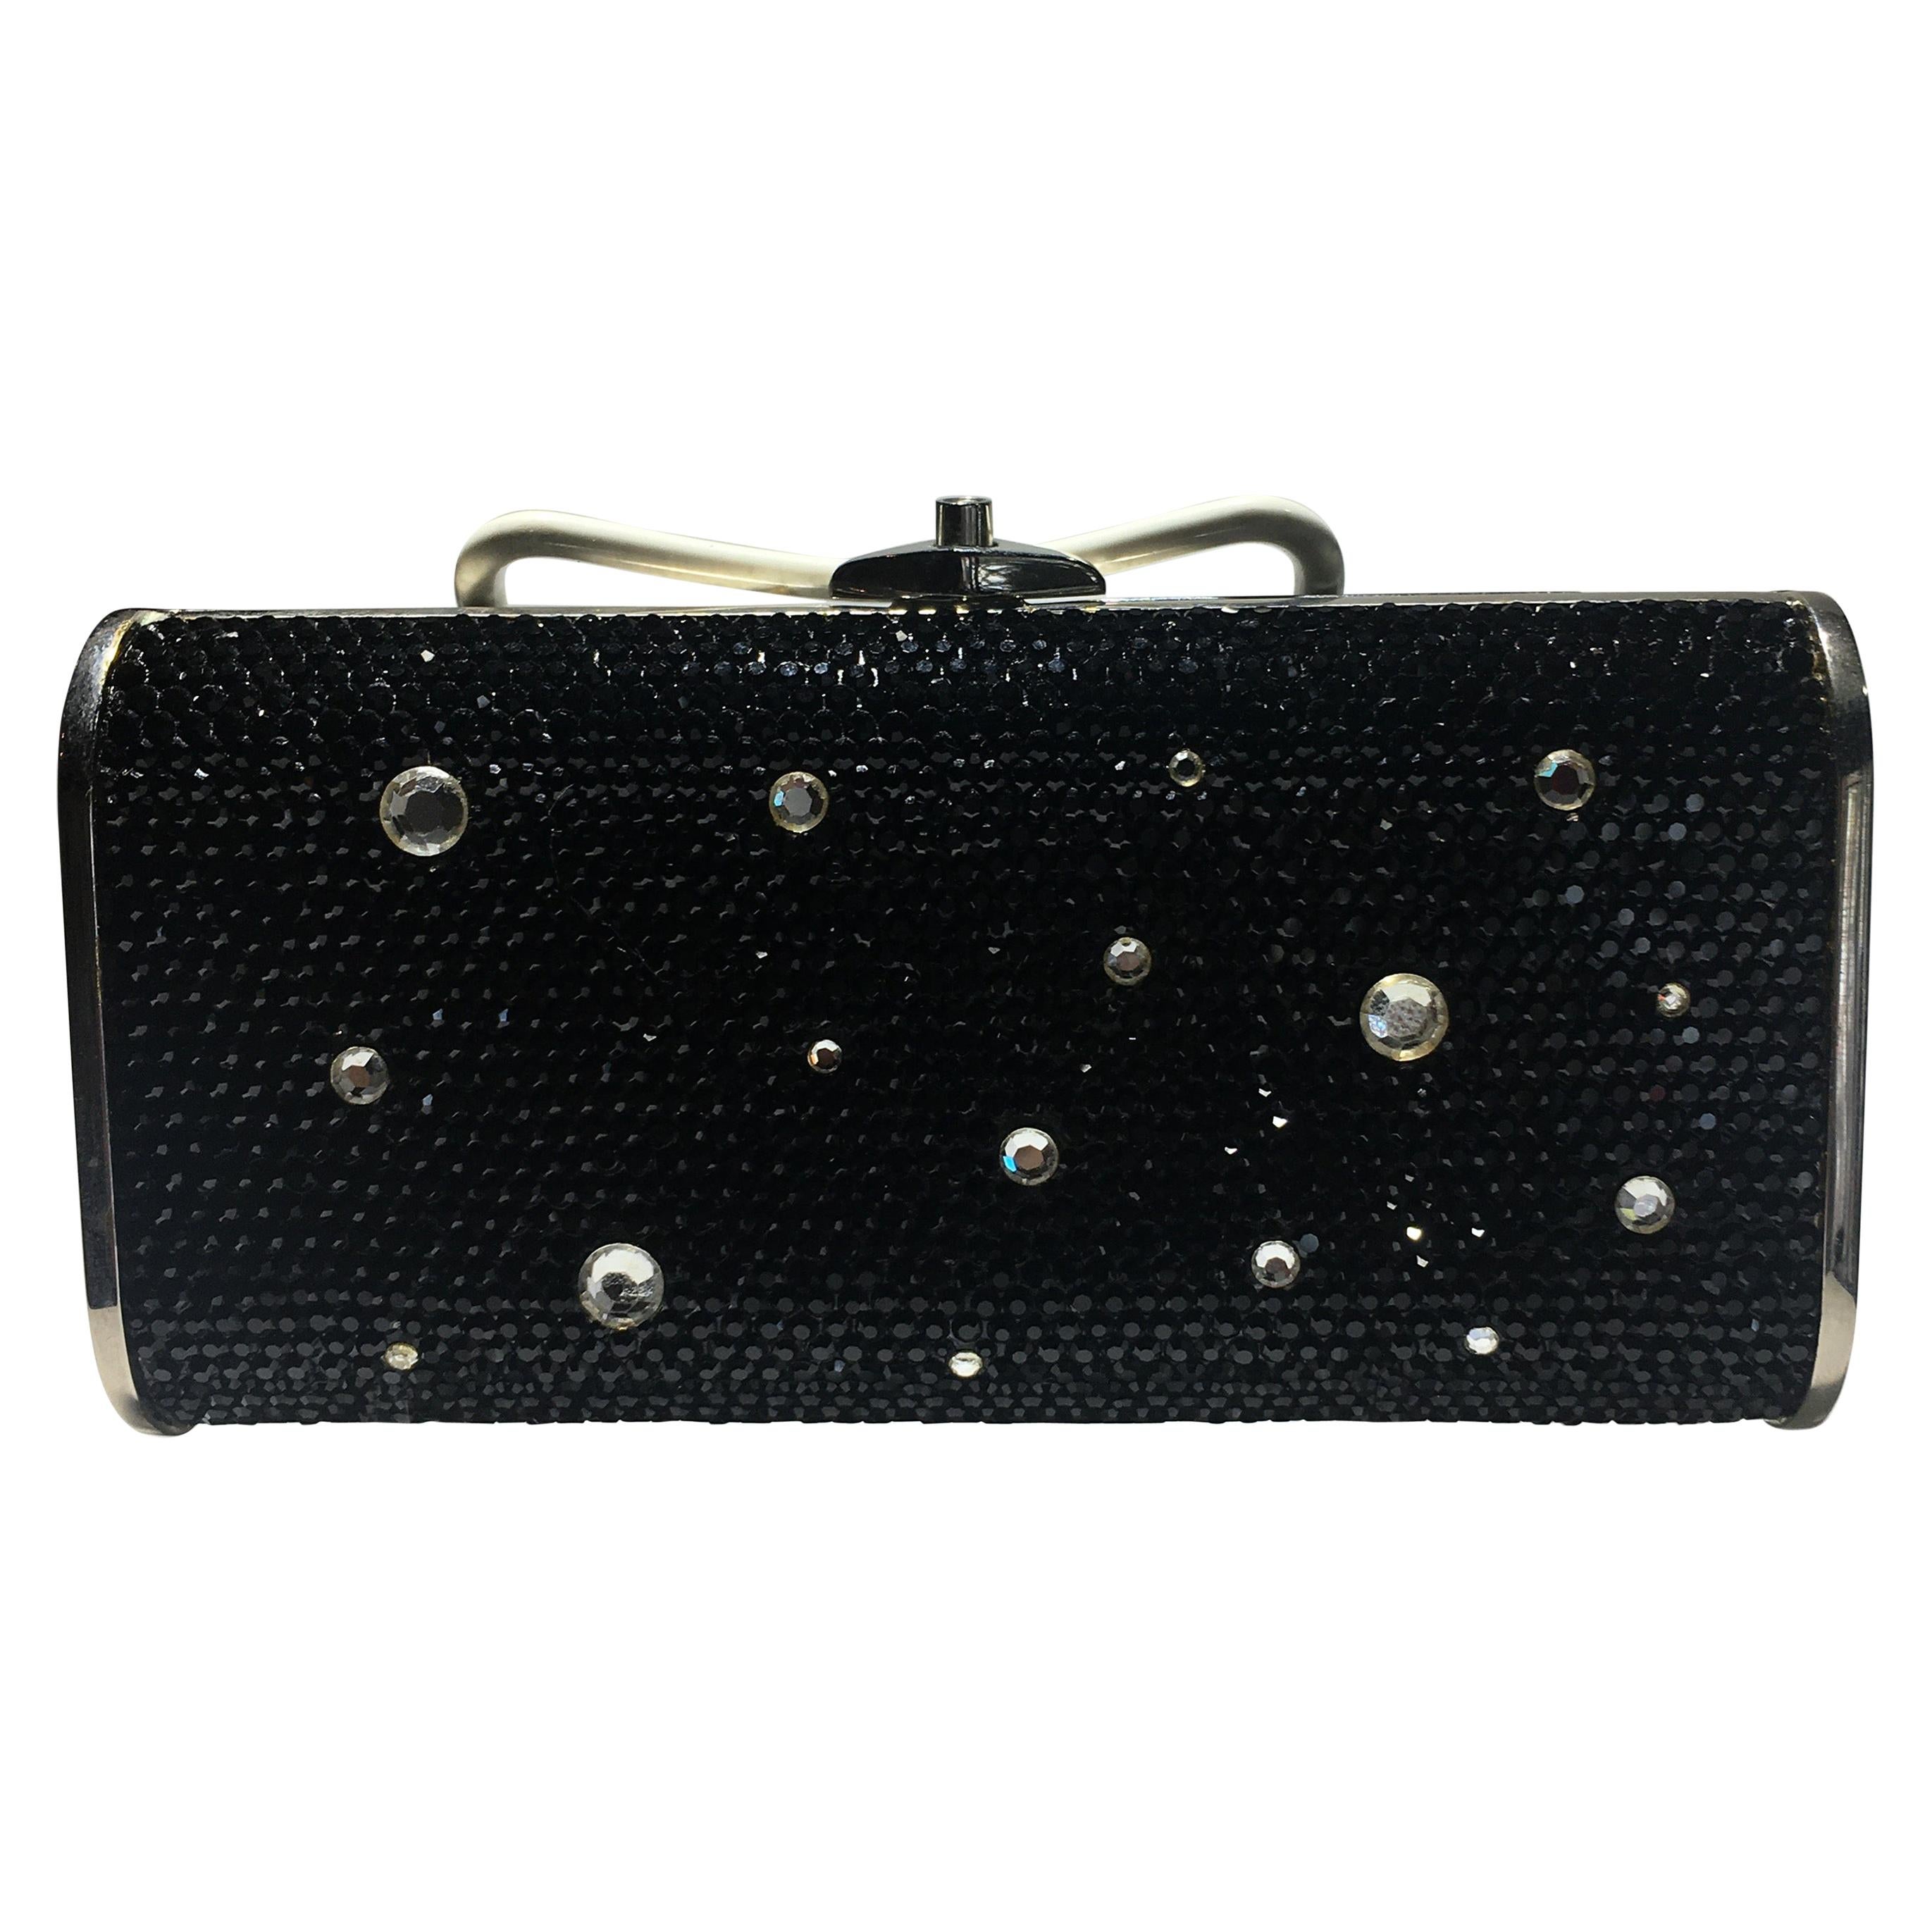 Judith Leiber Jeweled Clutch, Black And Clear Crrystals With Silver Strap.